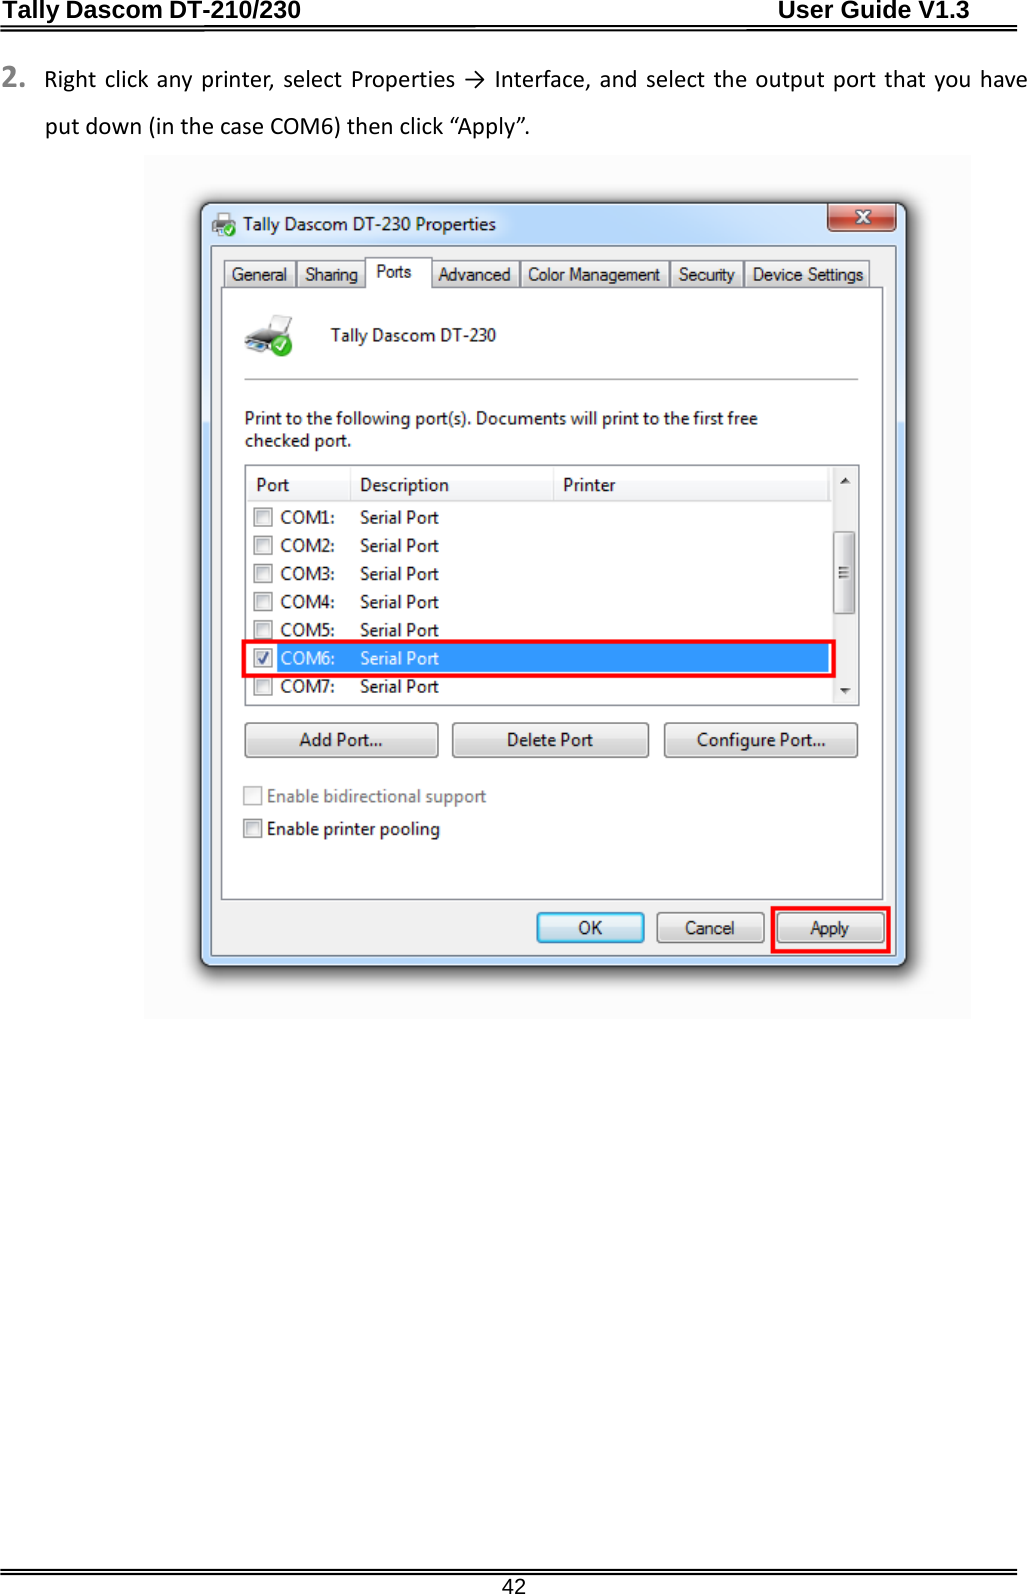 Tally Dascom DT-210/230                                      User Guide V1.3  42 2. Right click any printer, select Properties →  Interface, and select the output port that you have put down (in the case COM6) then click “Apply”.  